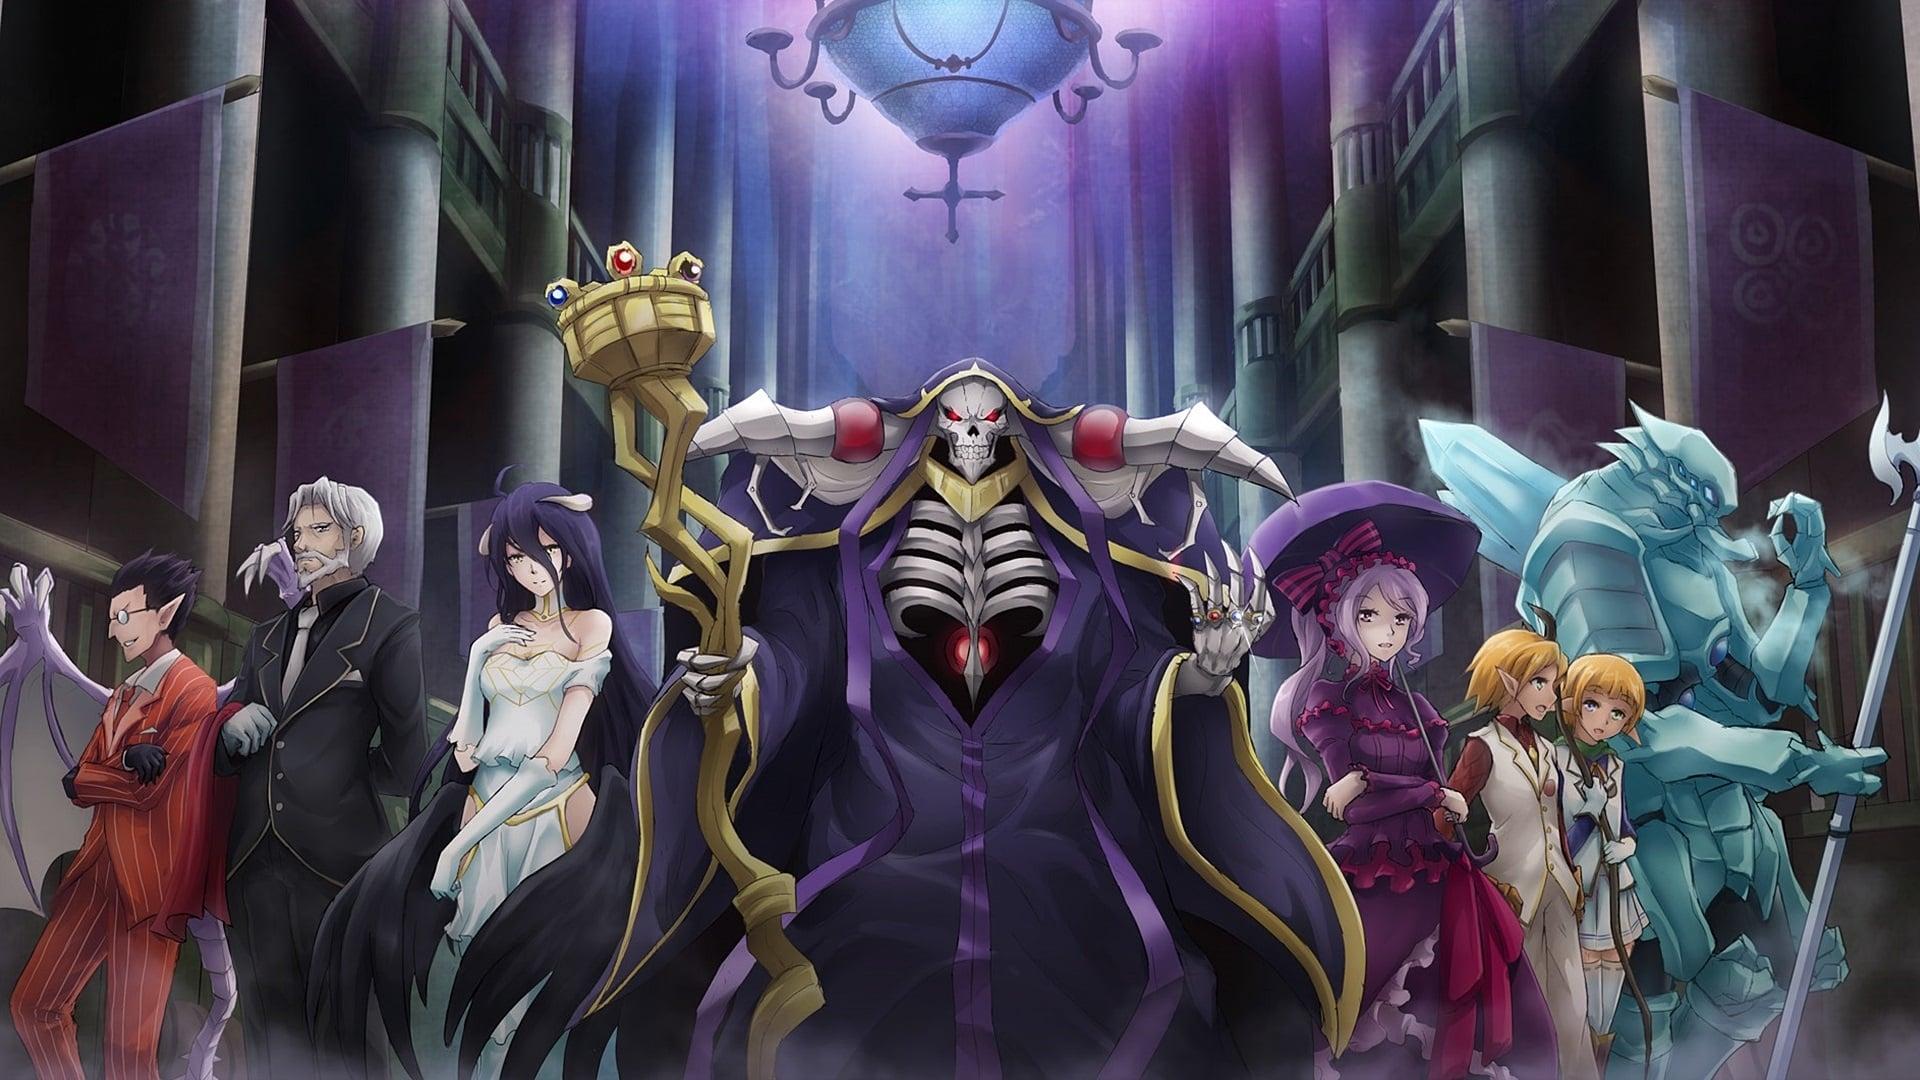 Overlord: The Undead King